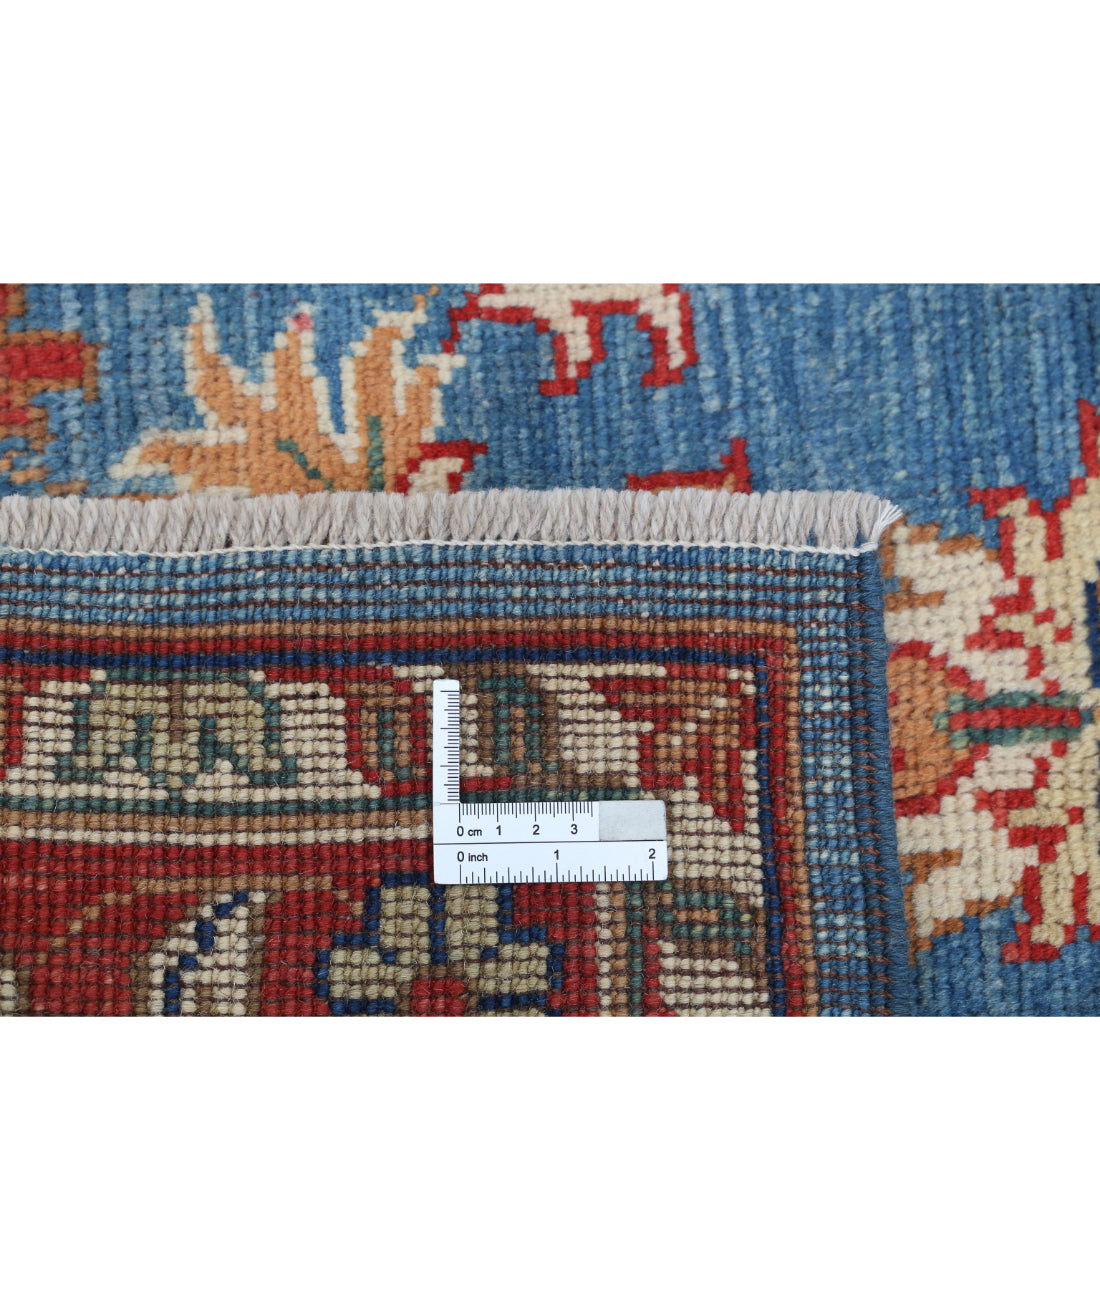 Ziegler 3'0'' X 5'0'' Hand-Knotted Wool Rug 3'0'' x 5'0'' (90 X 150) / Blue / Red